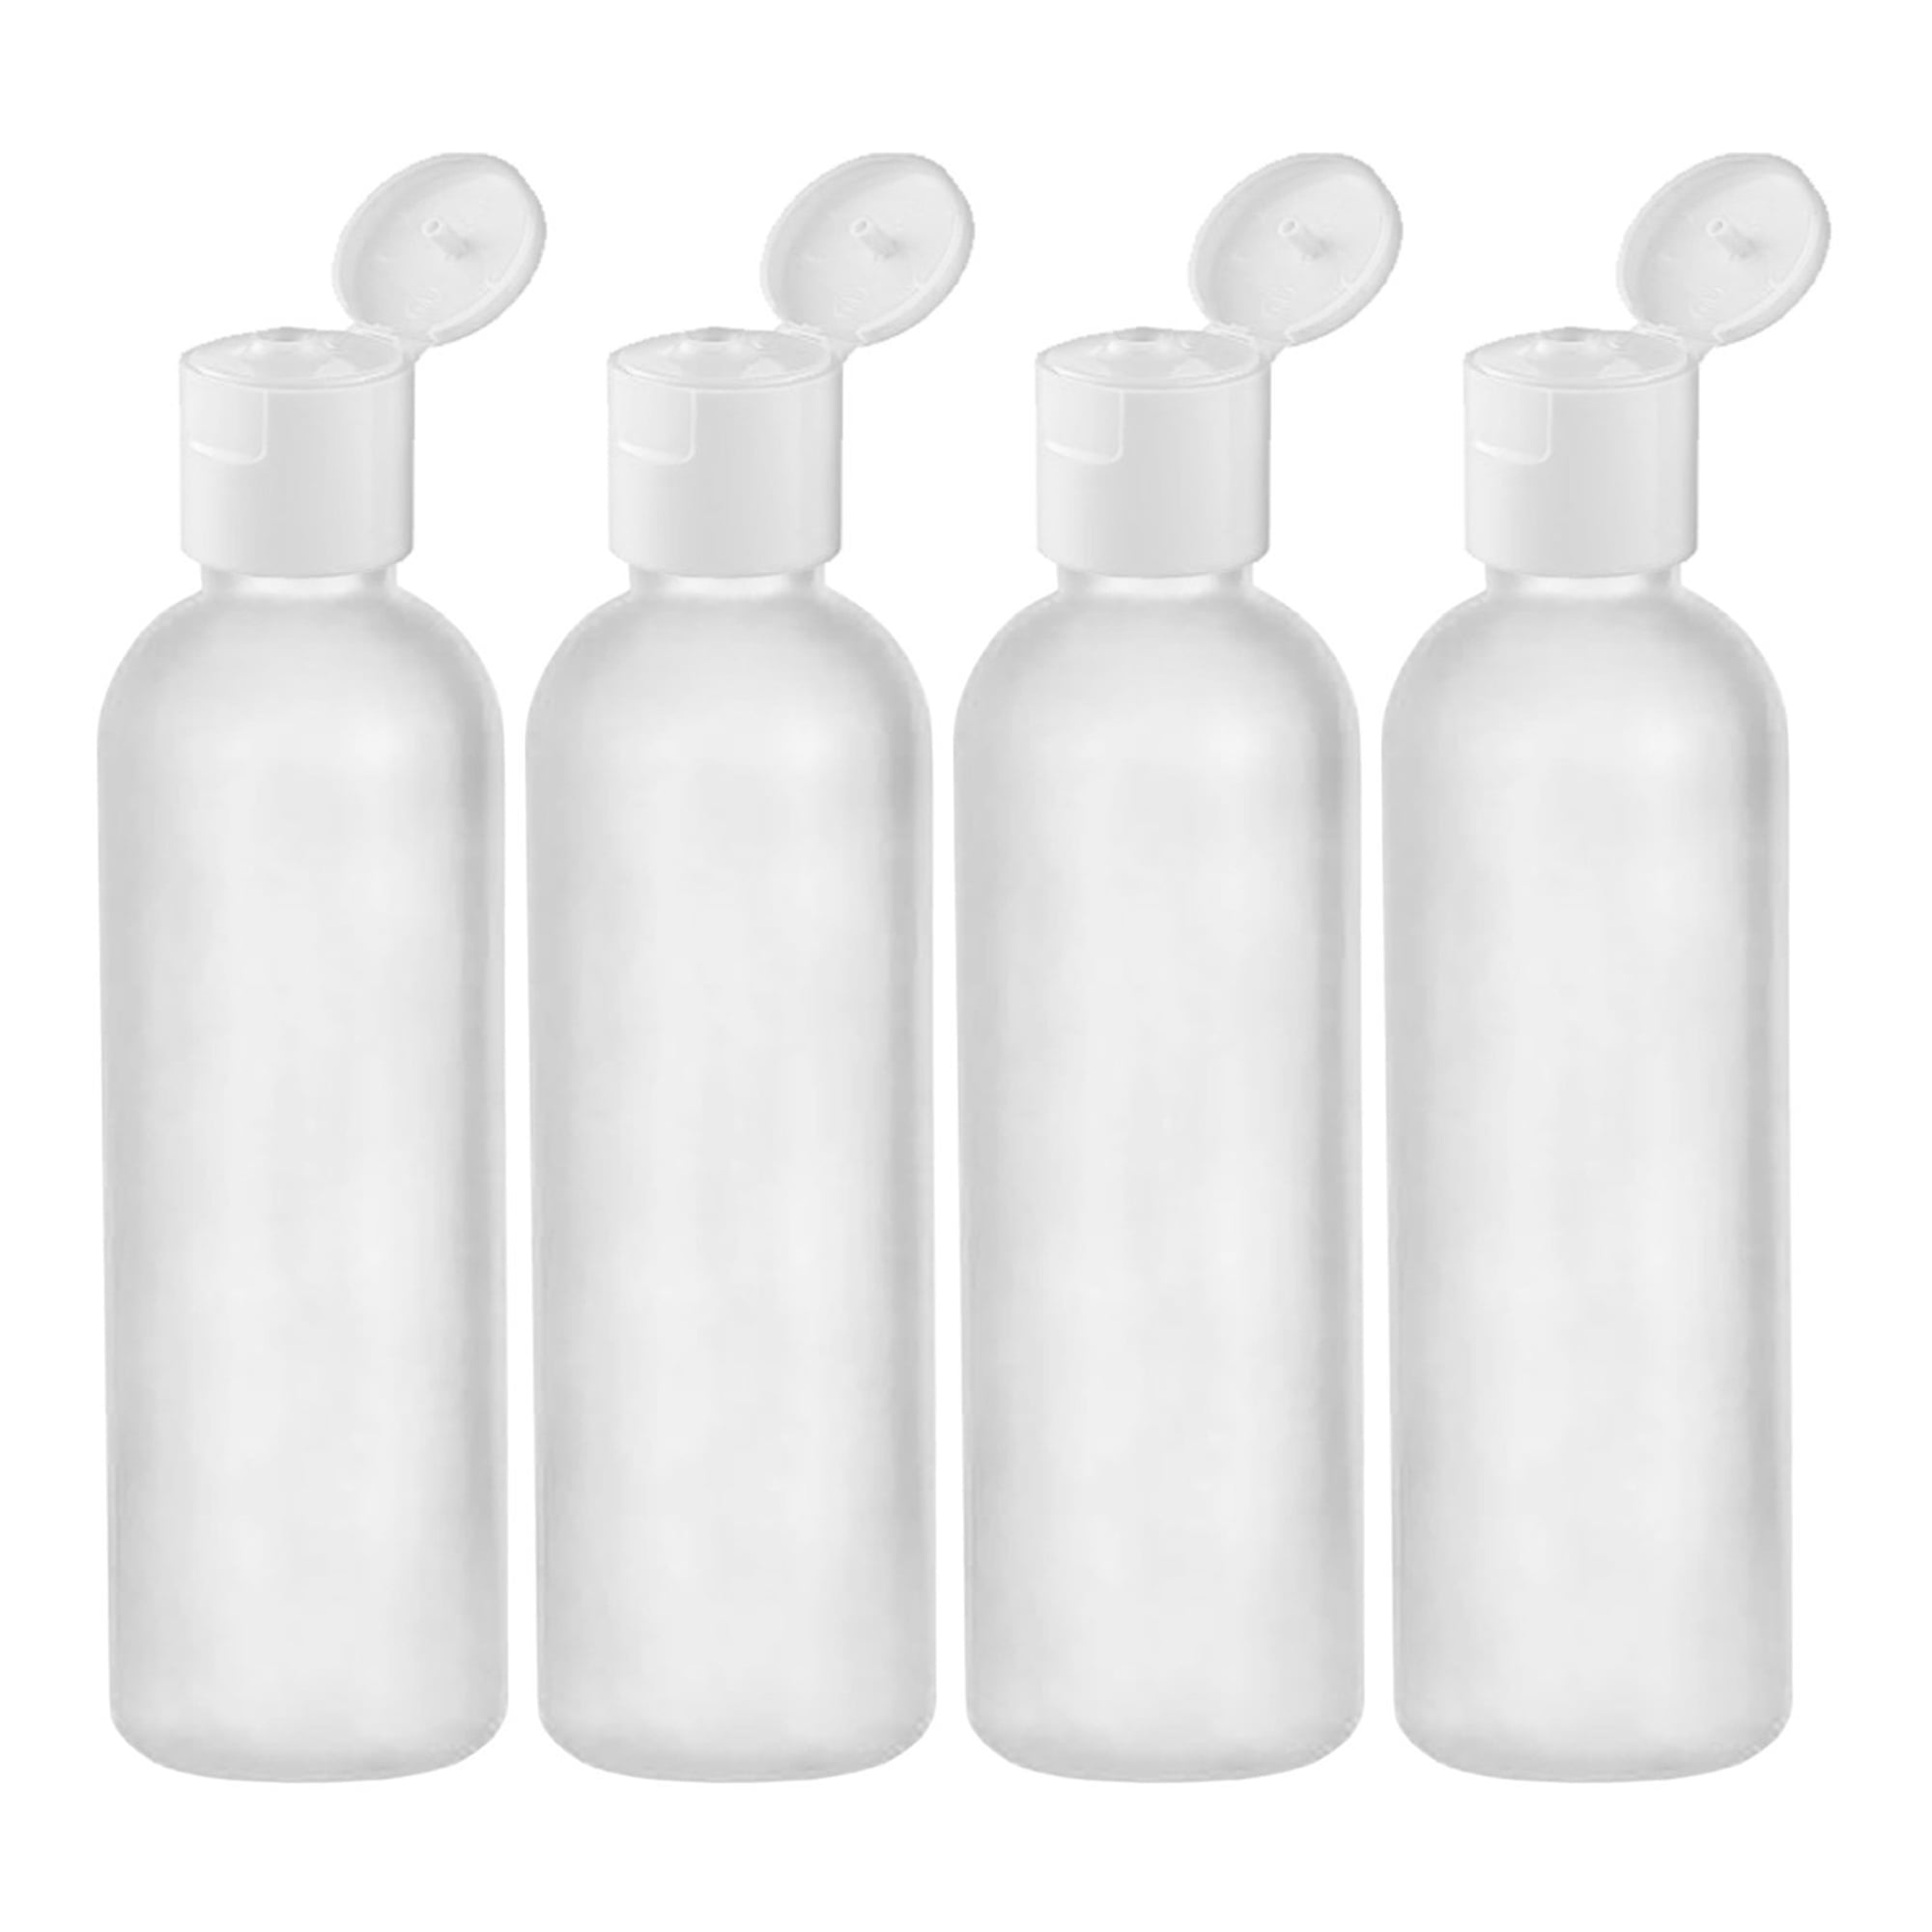 MoYo Natural Labs 2 oz Squirt Bottles, Squeezable Empty Travel Containers,  BPA Free HDPE Plastic for Essential Oils and Liquids, Toiletry/Cosmetic